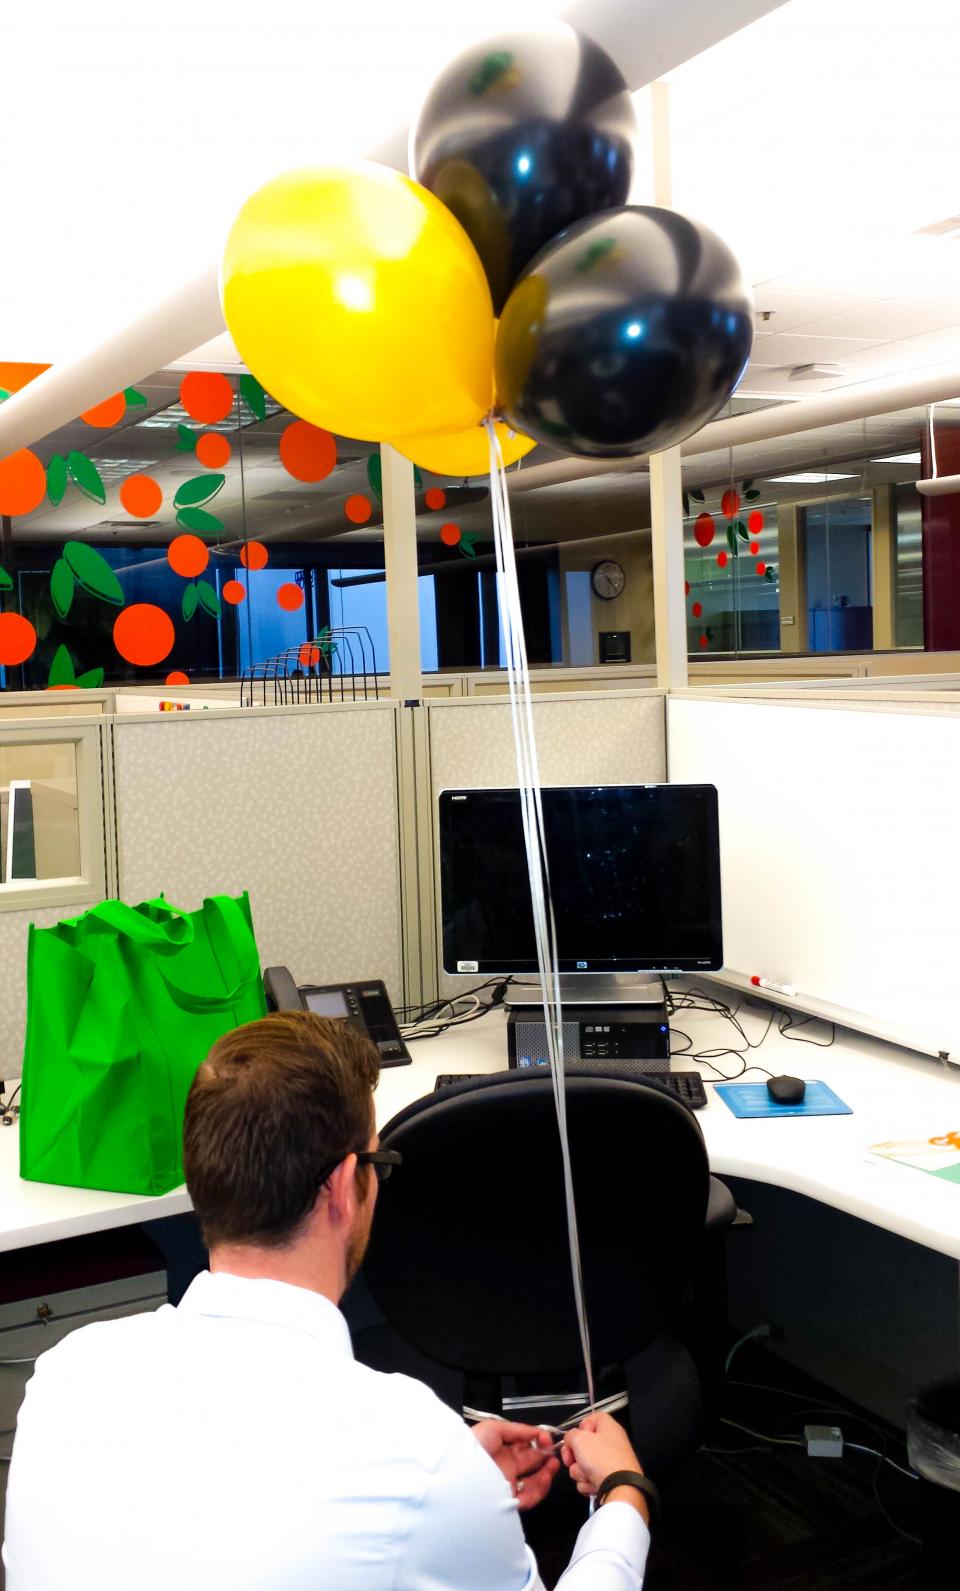 We welcomed interns by decorating their cubes with balloons in their college colors!